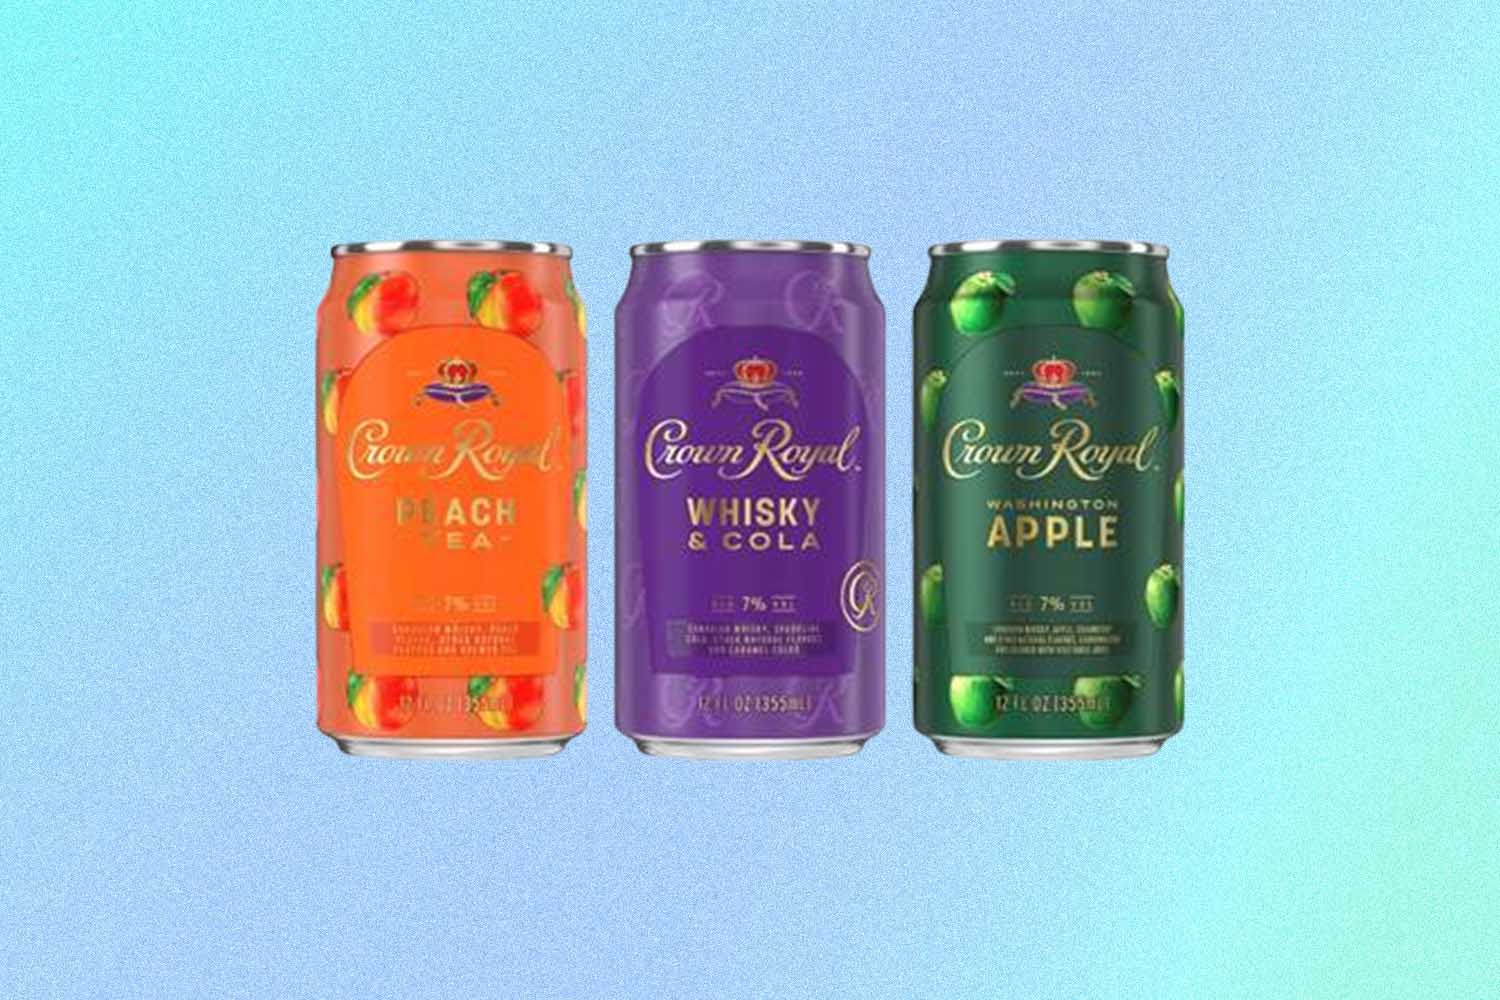 Crown Royal canned drinks